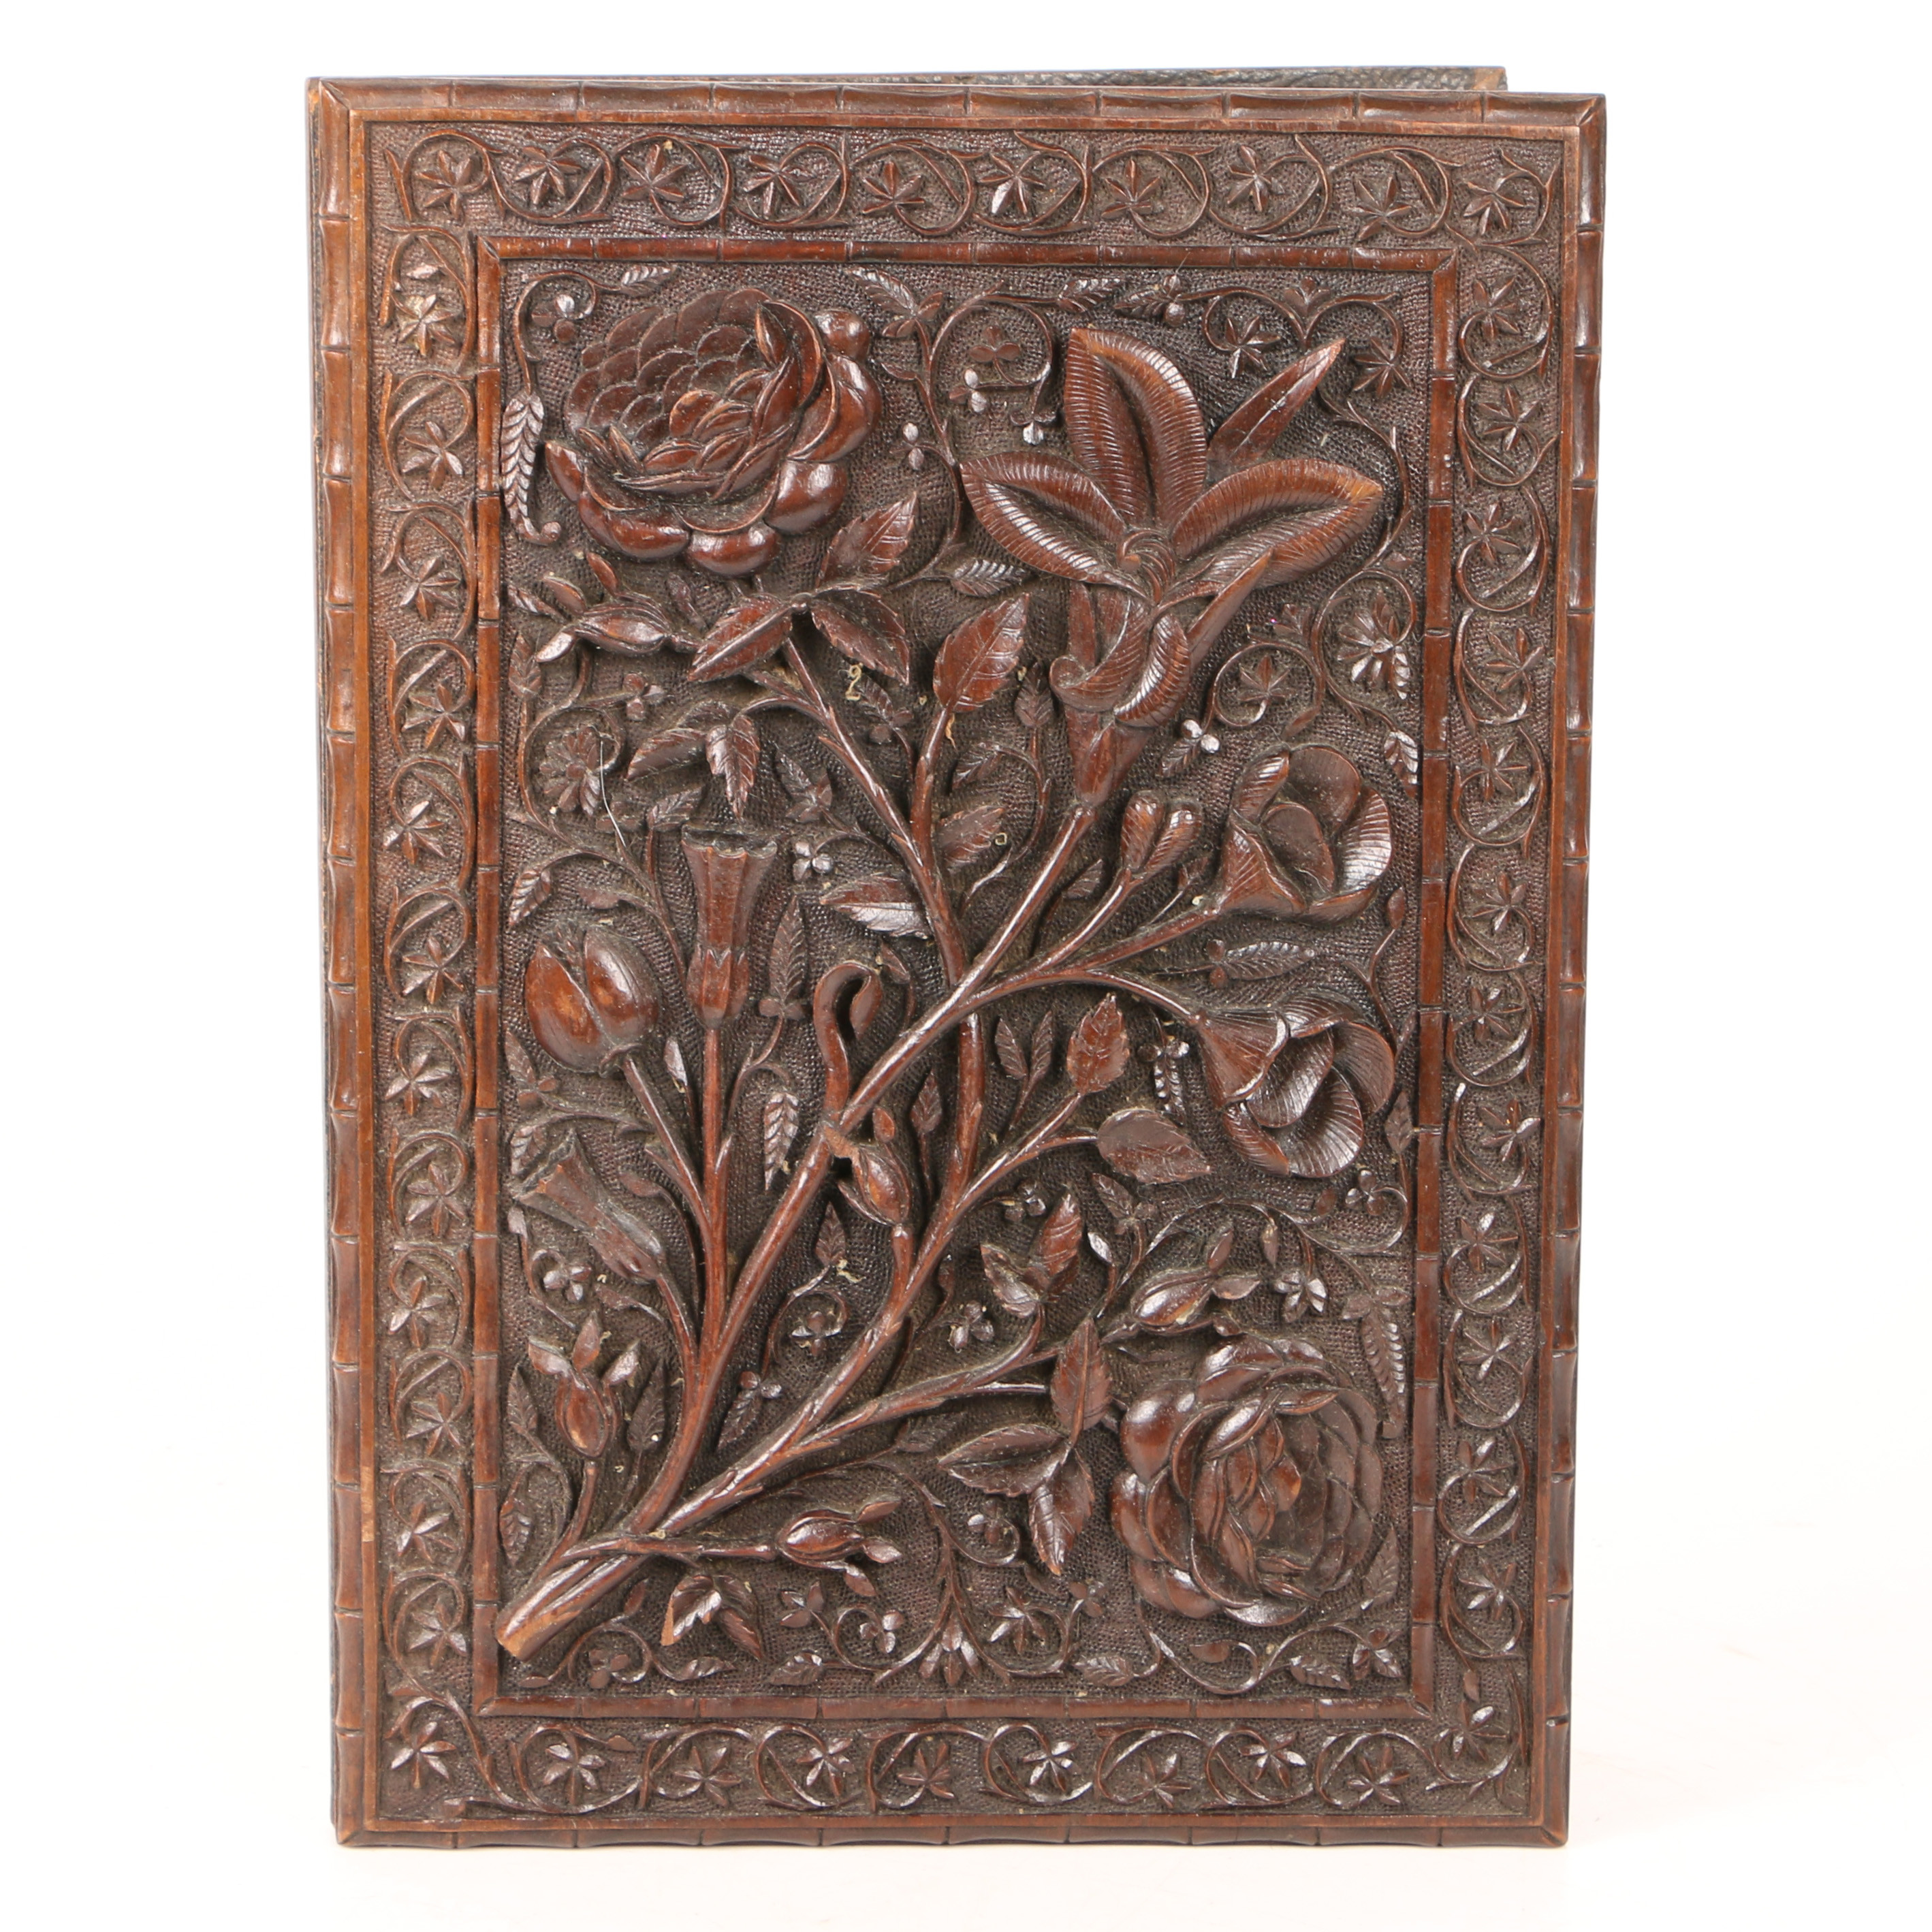 A 19TH CENTURY ANGLO INDIAN HARDWOOD BOOK COVER.